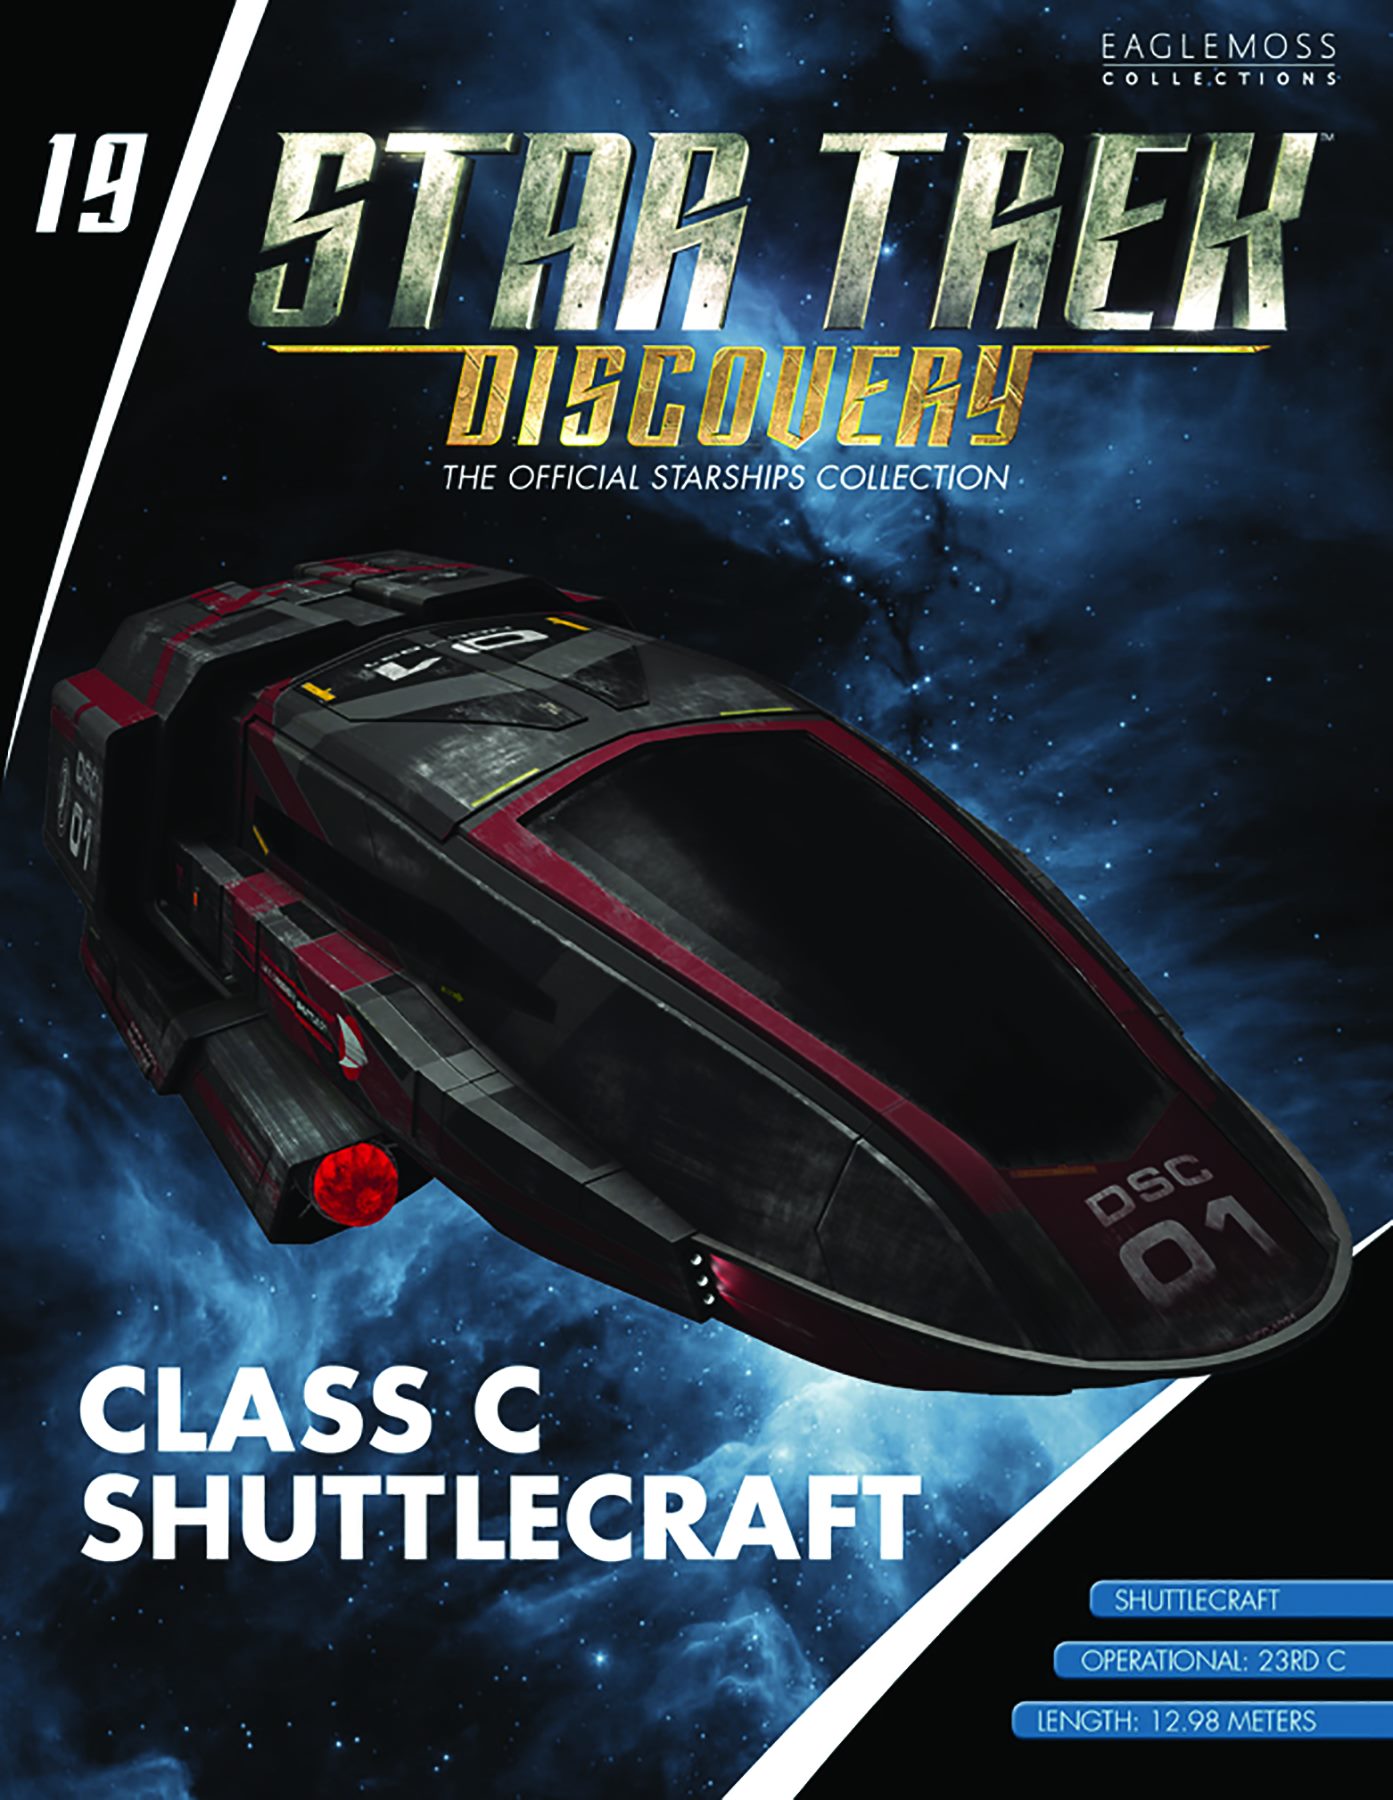 Star Trek: Discovery- The Official Starships Collection #19.jpg